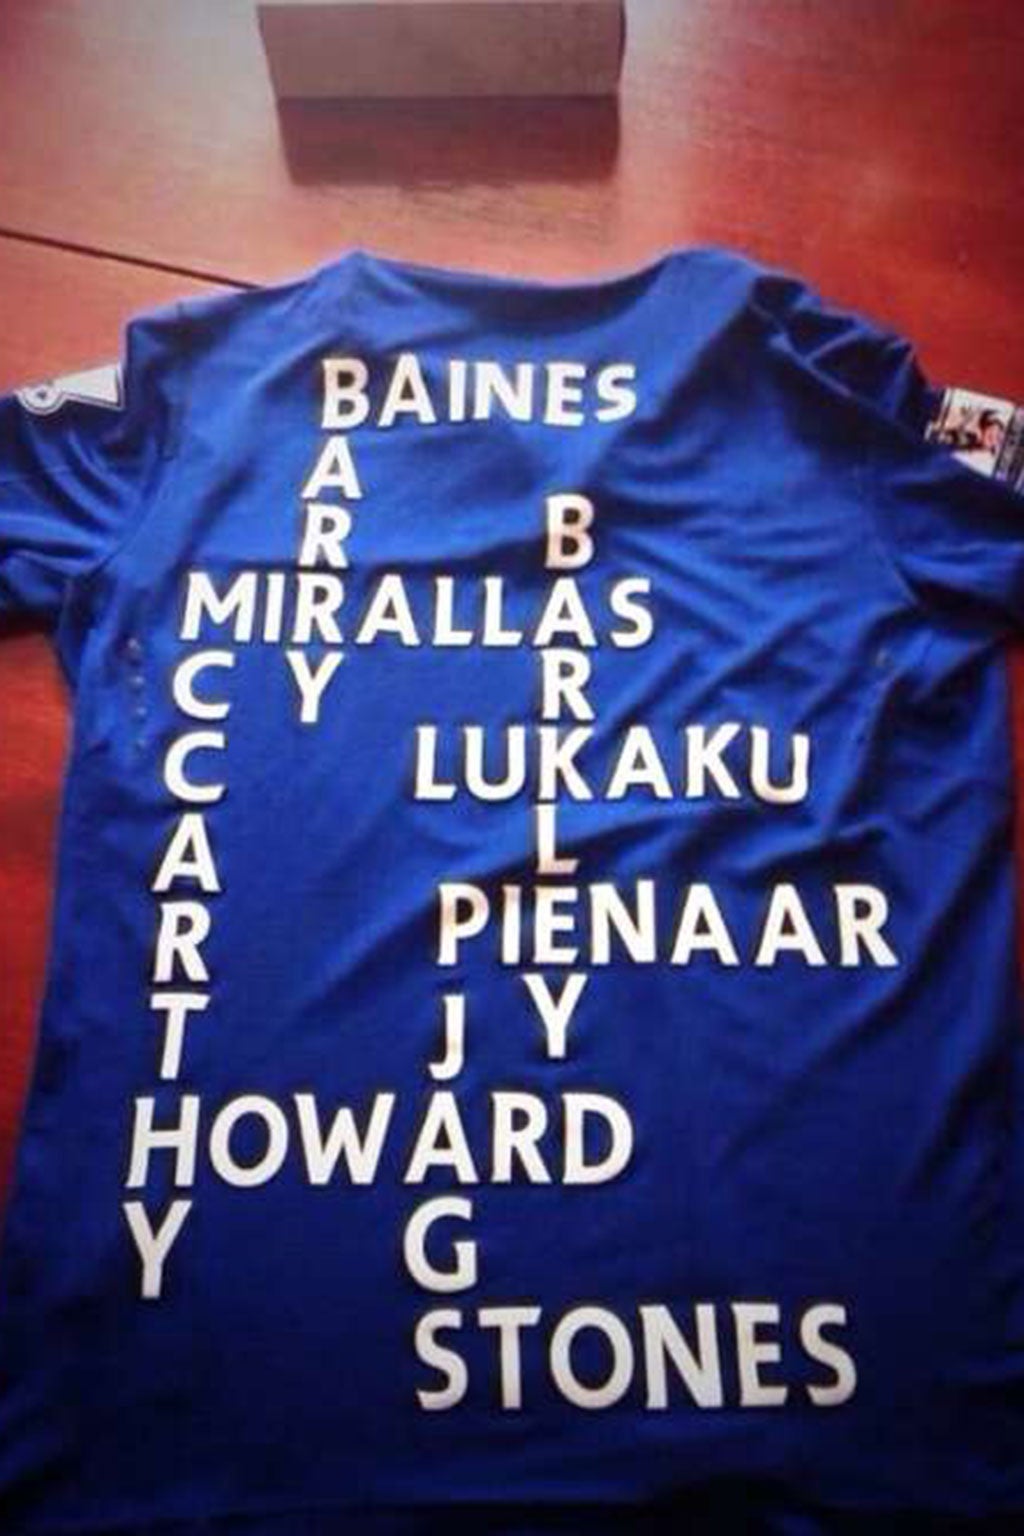 An Everton fans has got 10 names printed on the back of his new shirt